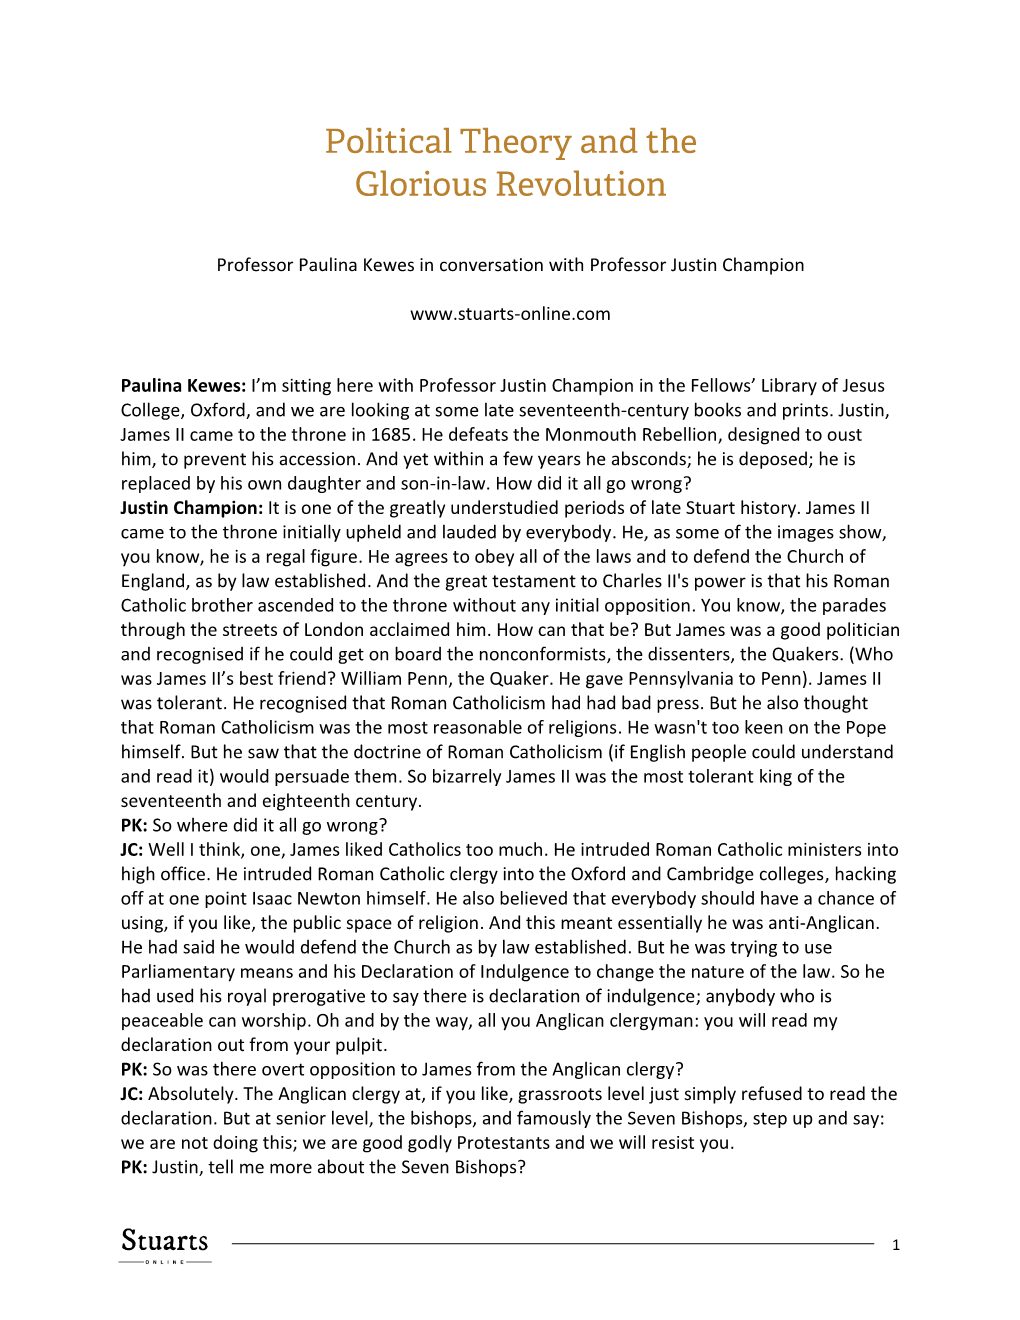 Political Theory and the Glorious Revolution